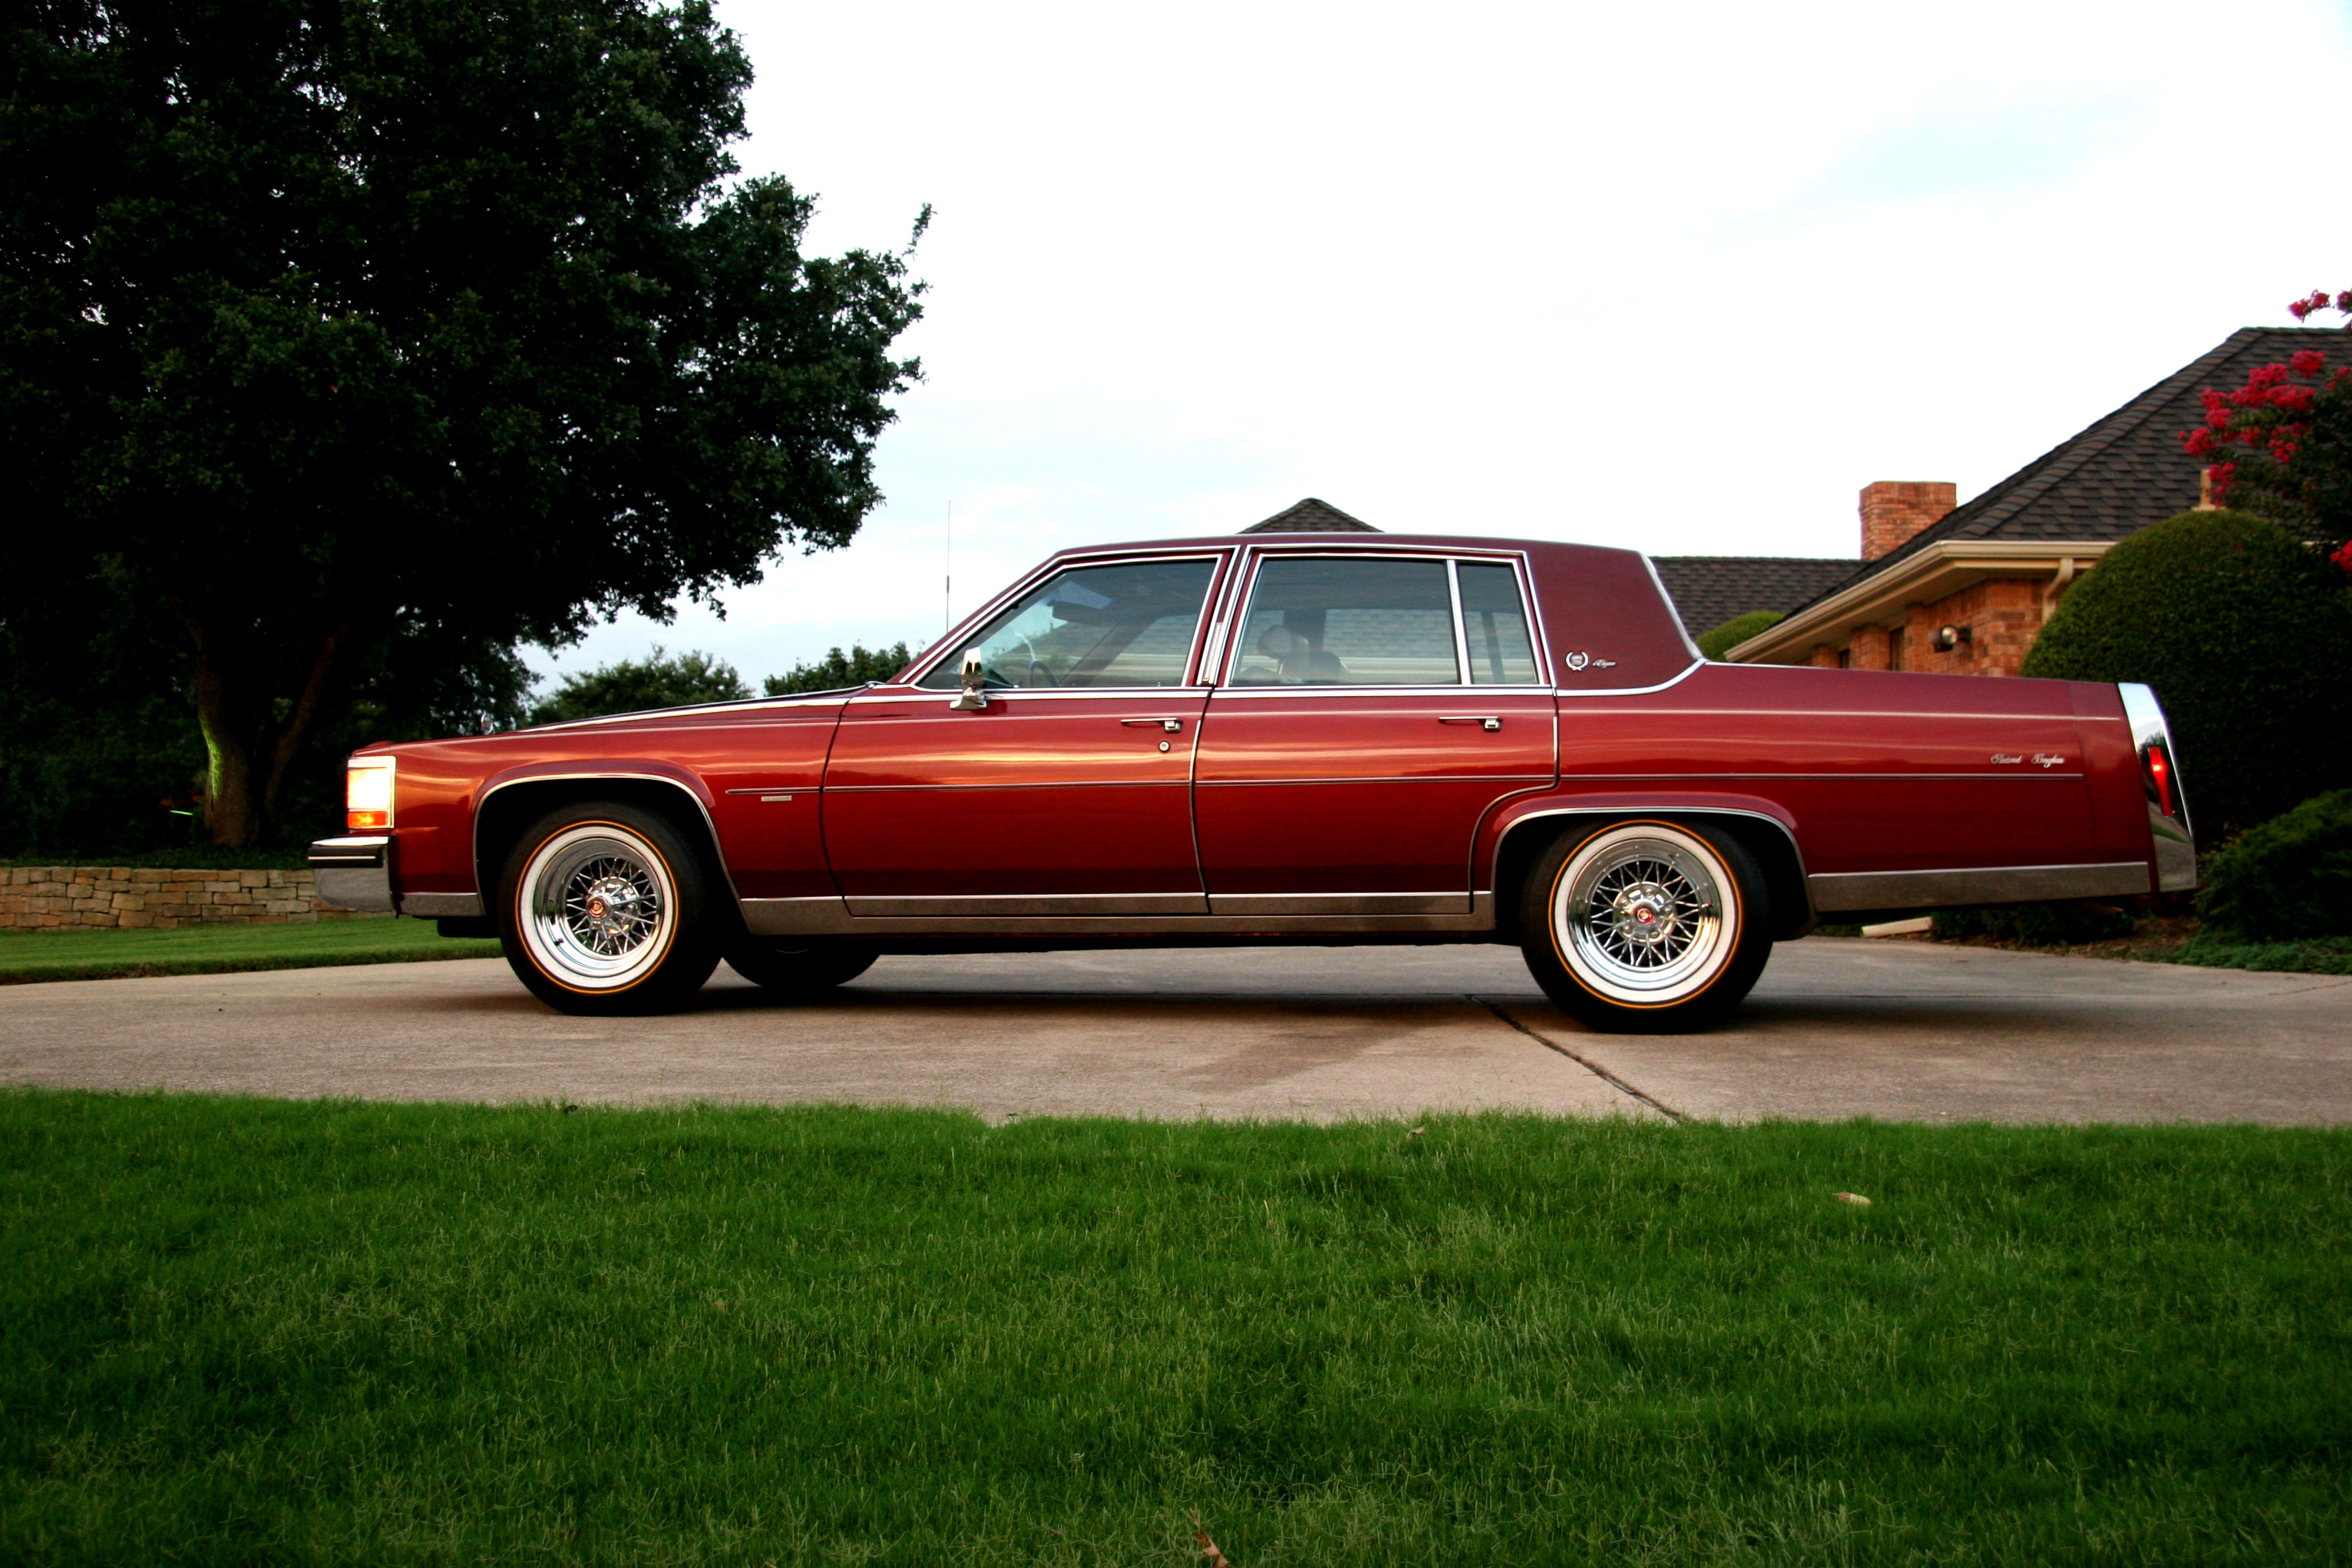 1986 1992 Cadillac Fleetwood Brougham The End Of An Era